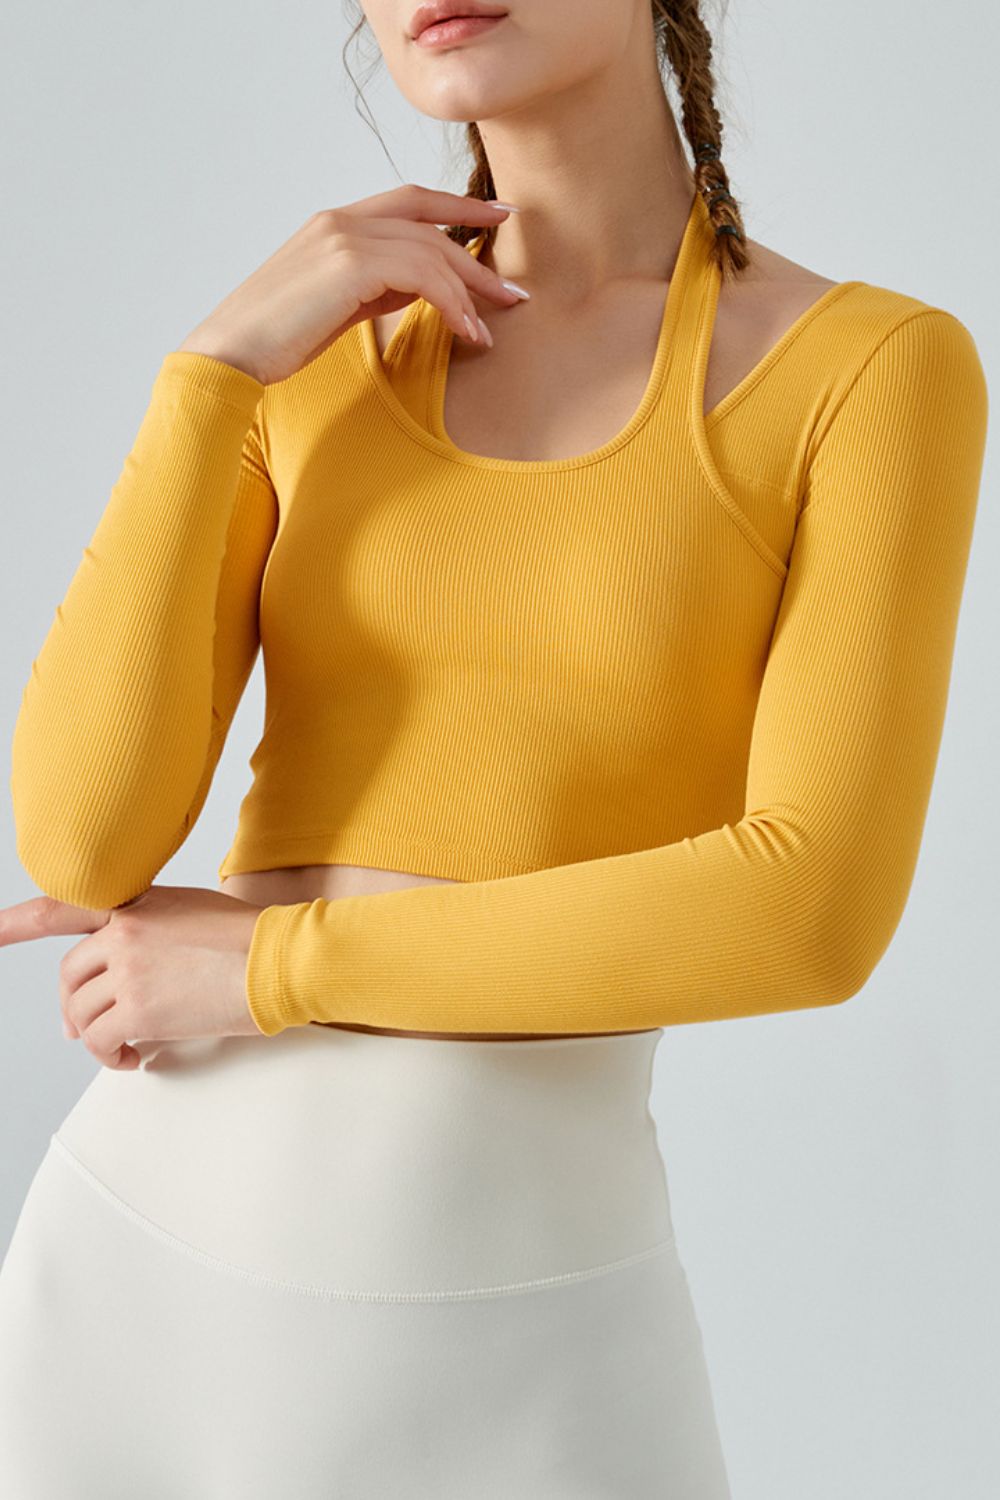 Halter Neck Long Sleeve Cropped Sports Top – Lauren's Chic Boutique